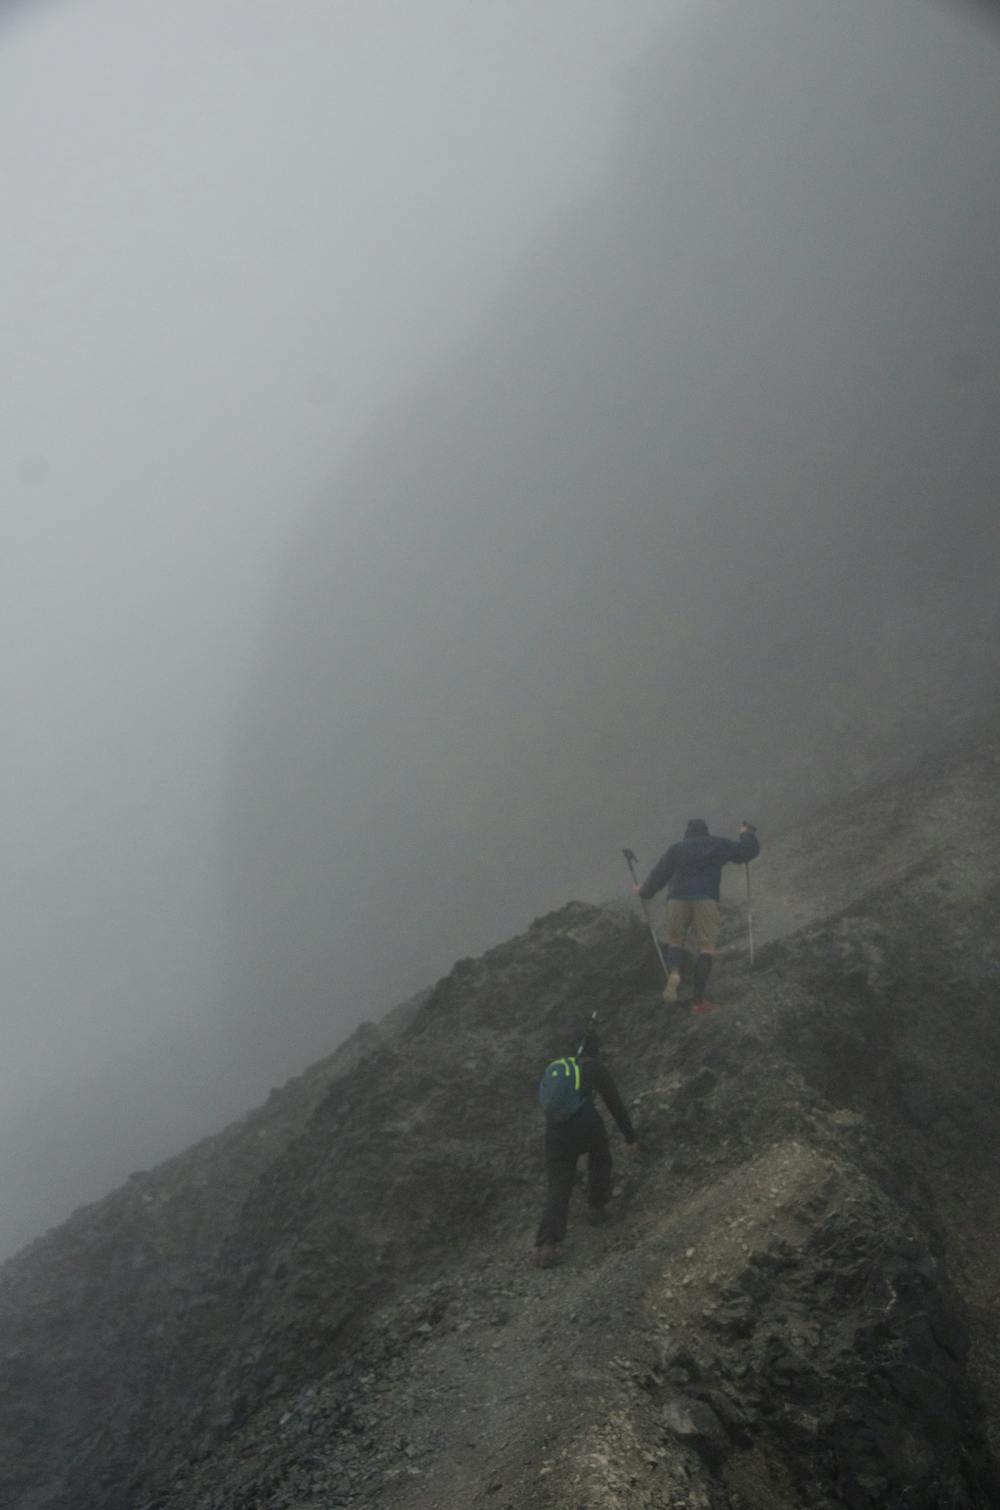 The Black Tusk itself is a doable objective along the way. However, the conditions very. In damp and foggy conditions the trail can be hard to find in the scree, and the tricky scrambling can be risky. Rockfall is common so bring a climbing helmet if you intend to summit.